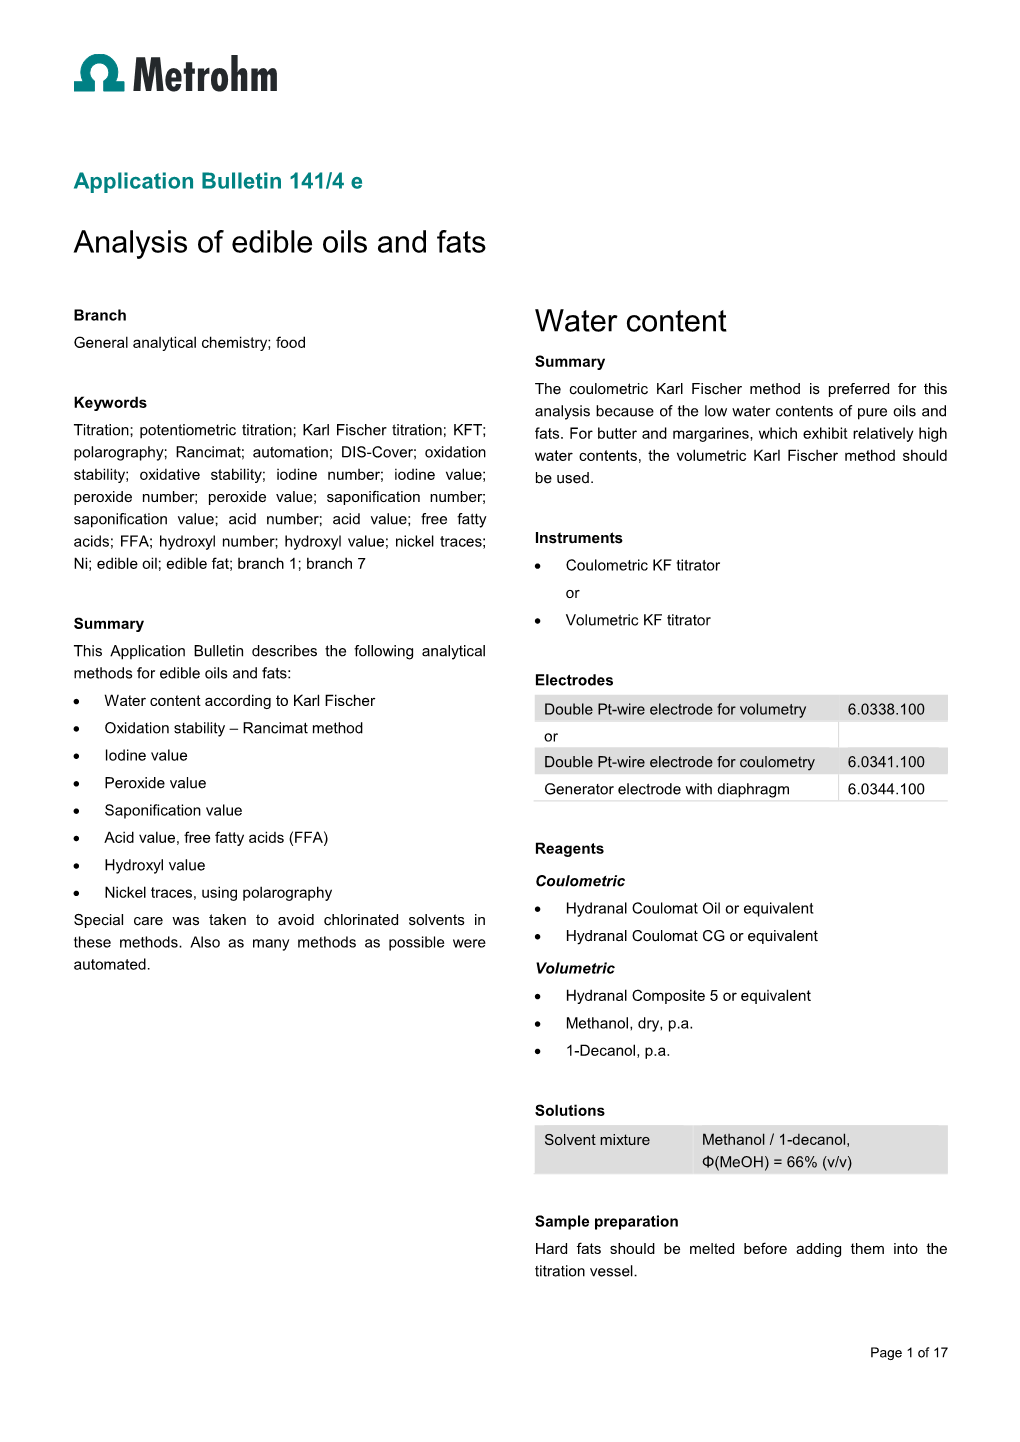 Analysis of Edible Oils and Fats